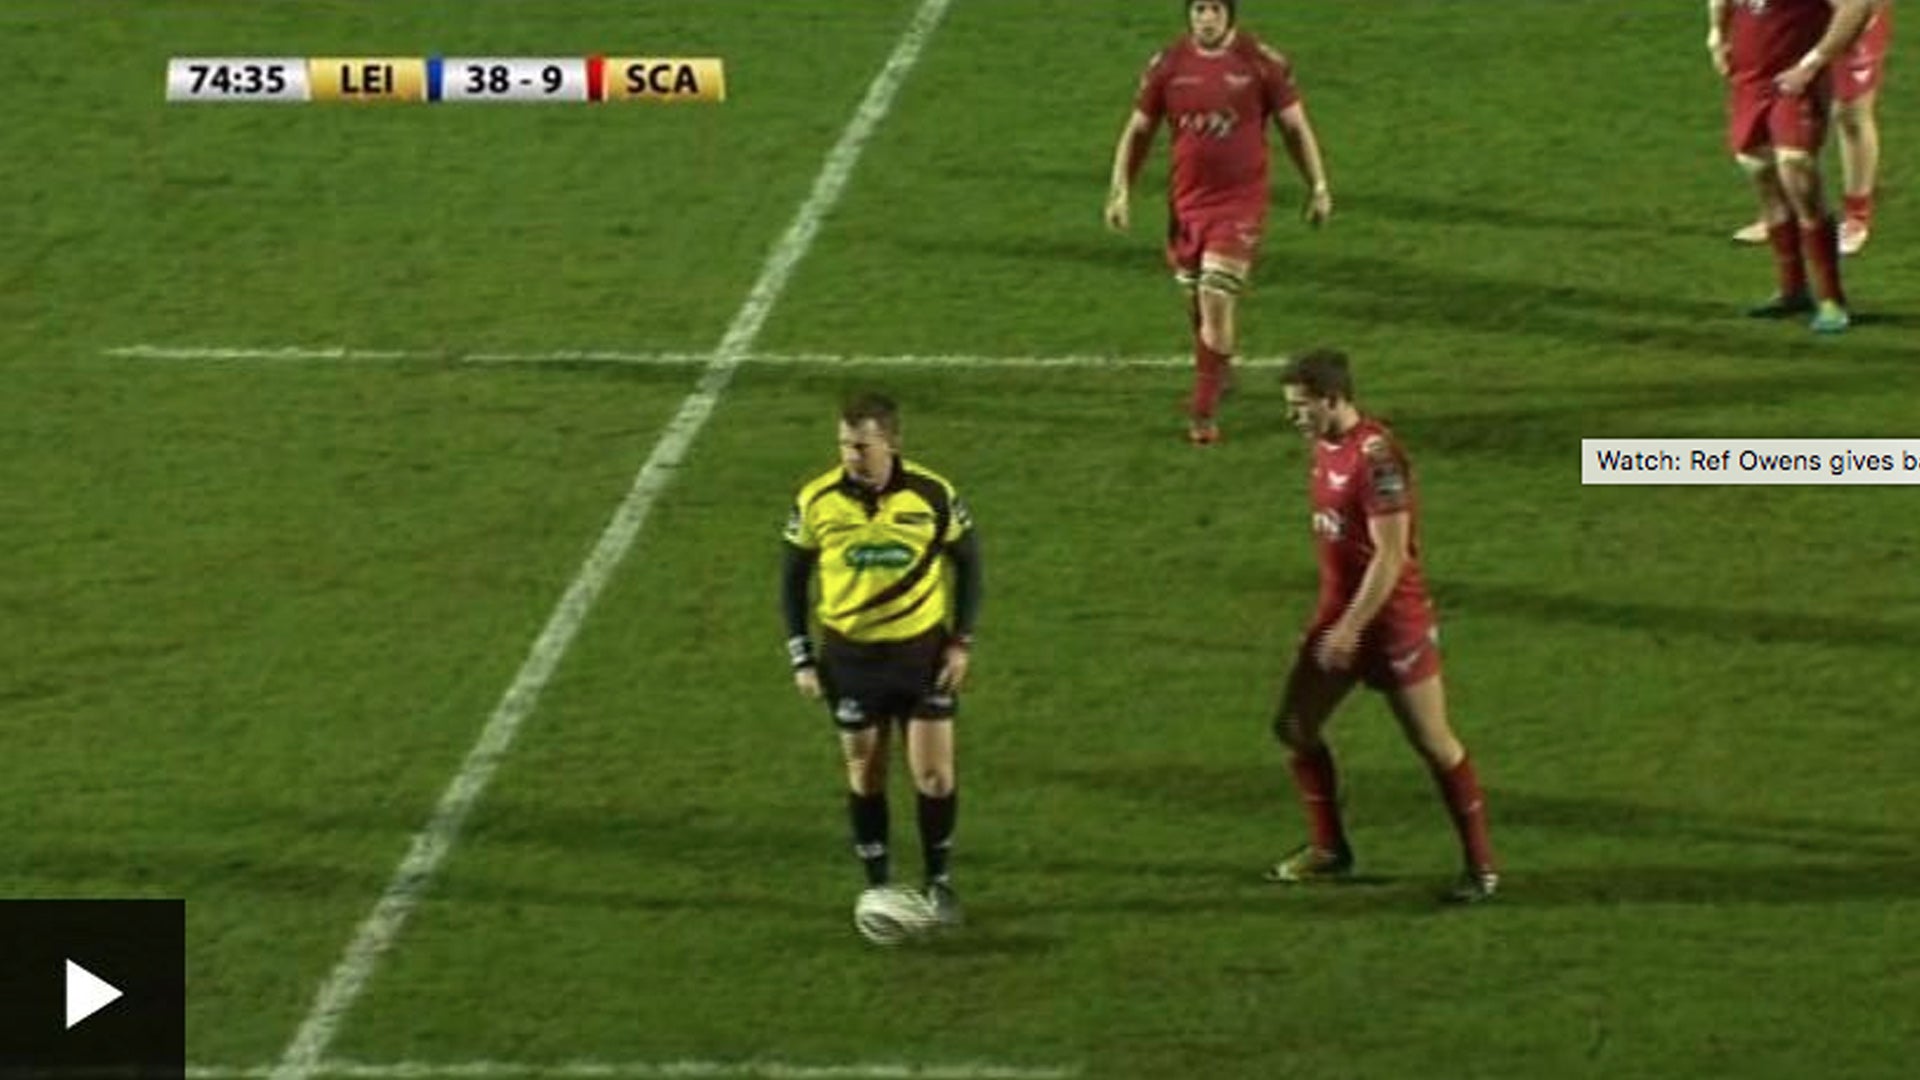 Watch: Ref Owens gives ball boy a yellow card!